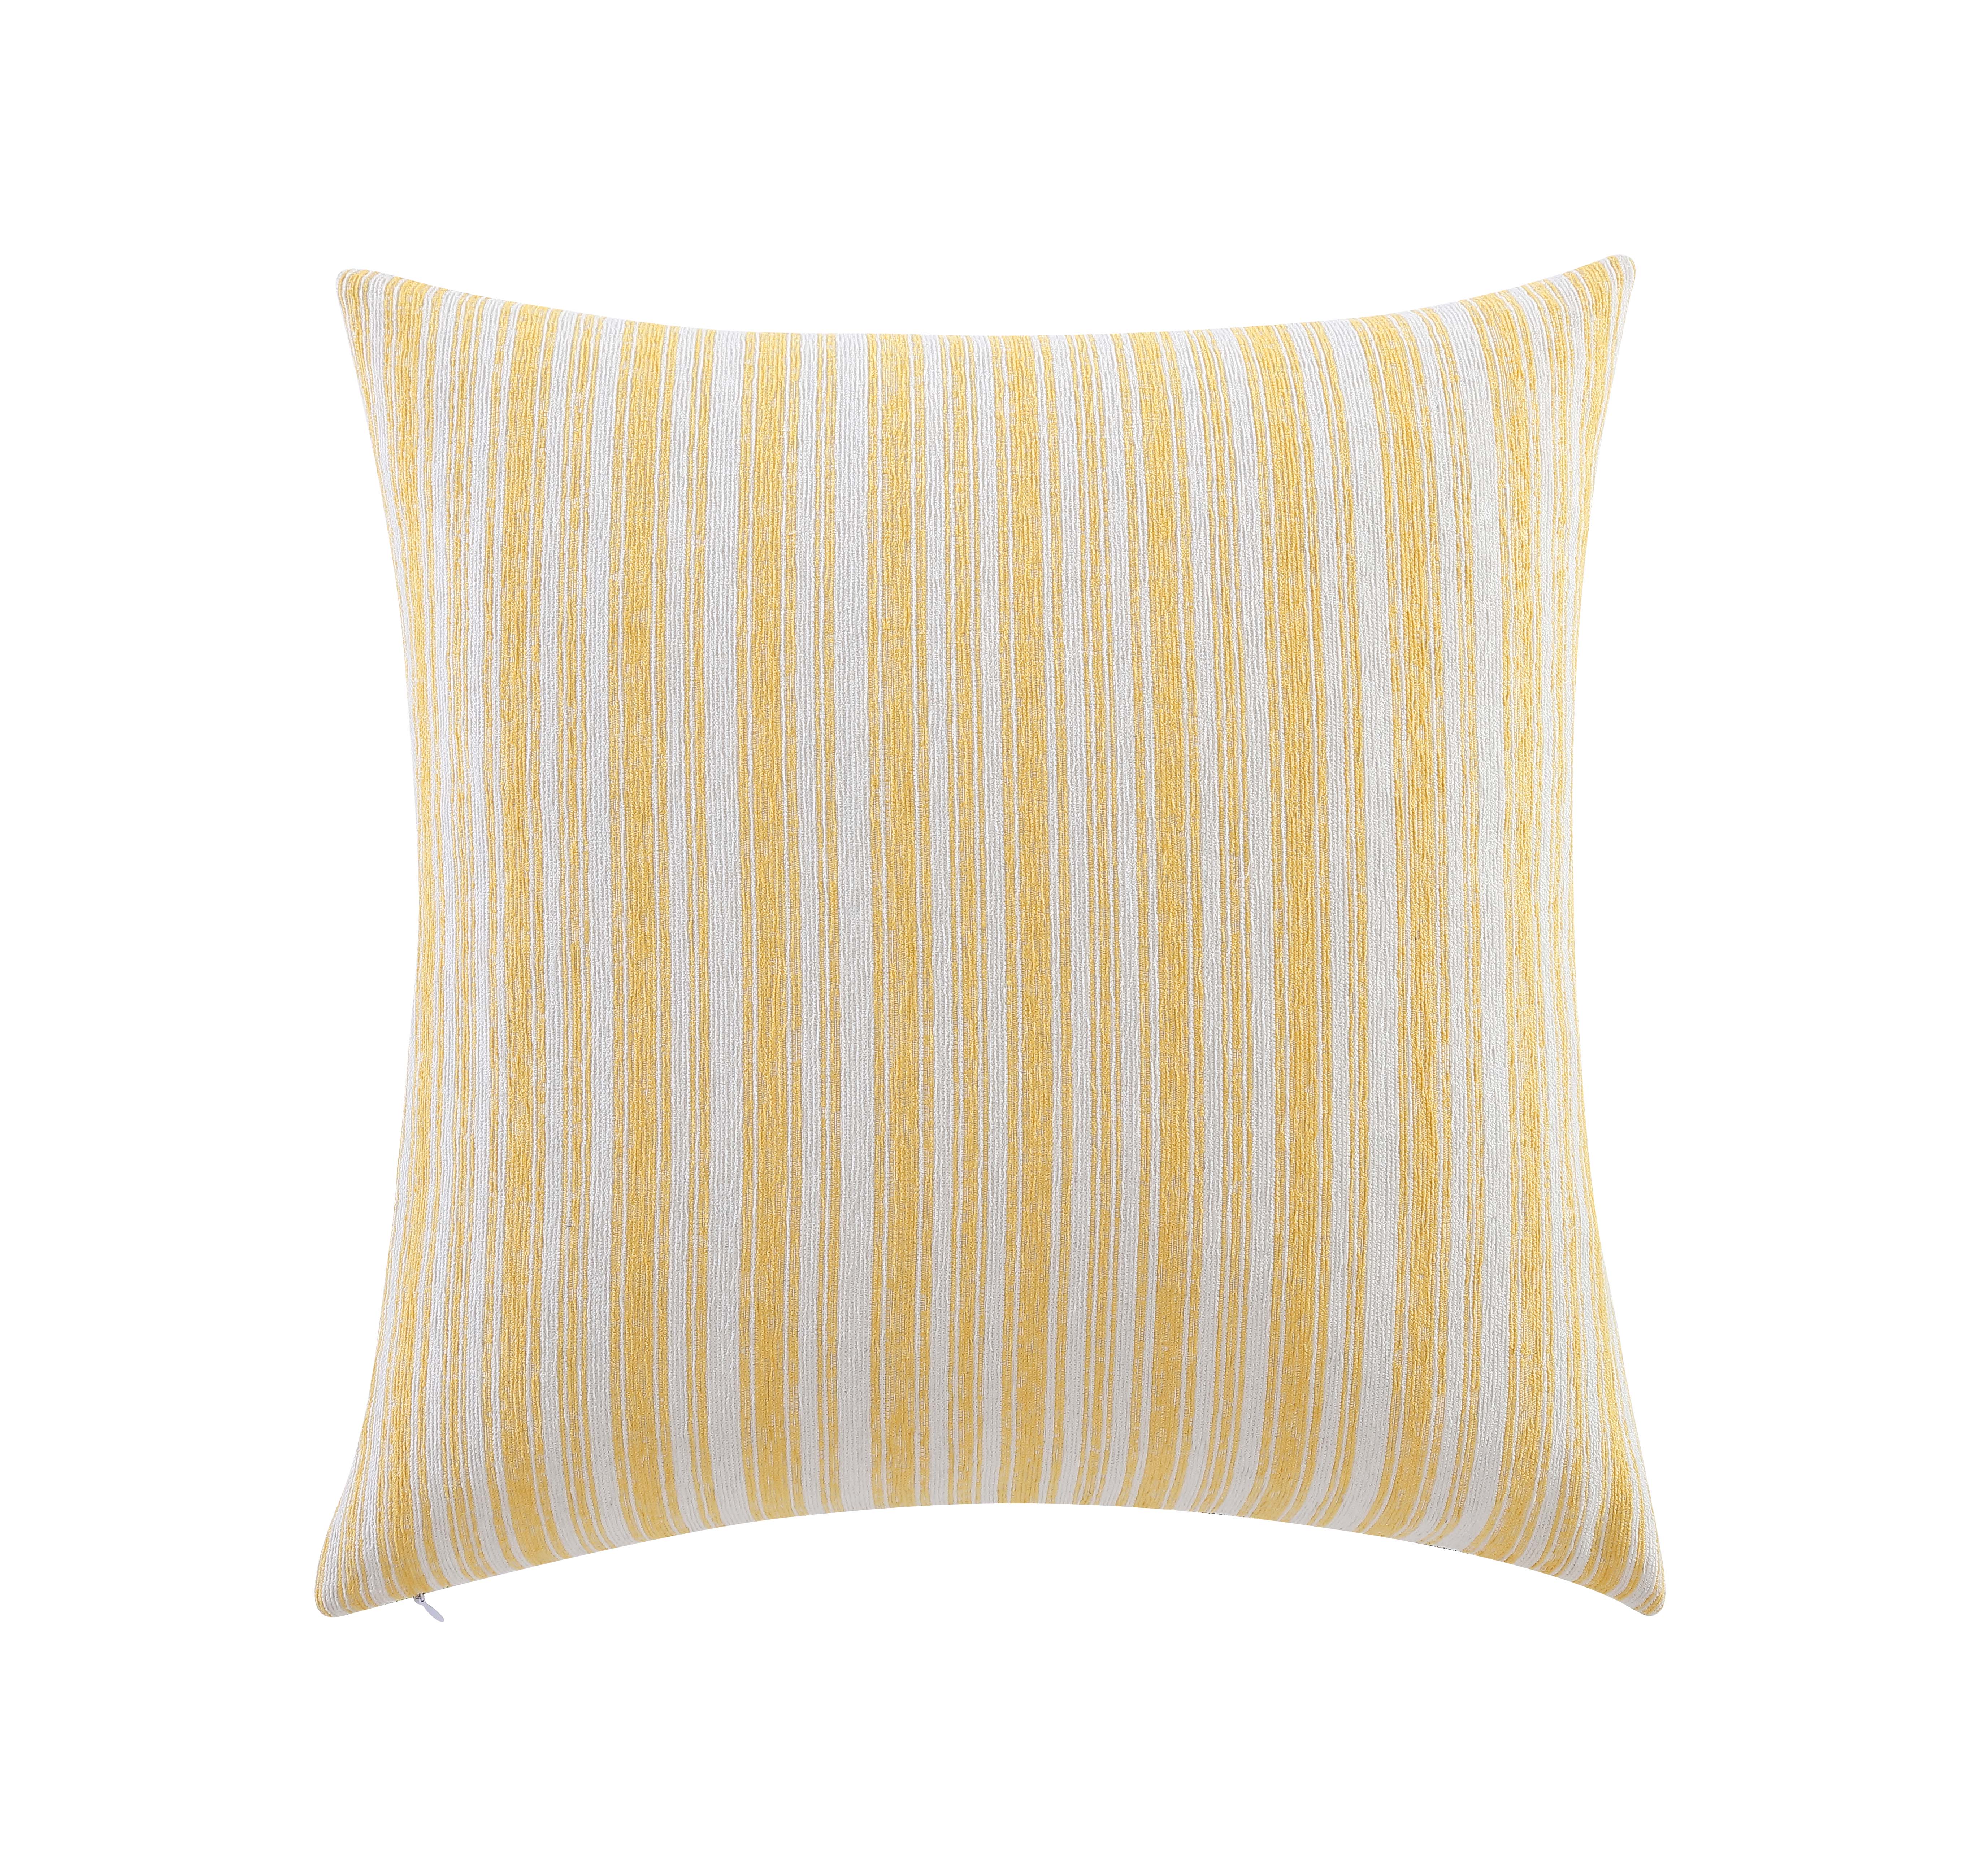 Mainstays Decorative Throw Pillow, Botanical, Square, Yellow and Coral, 20x20, 1 Pack - image 3 of 5